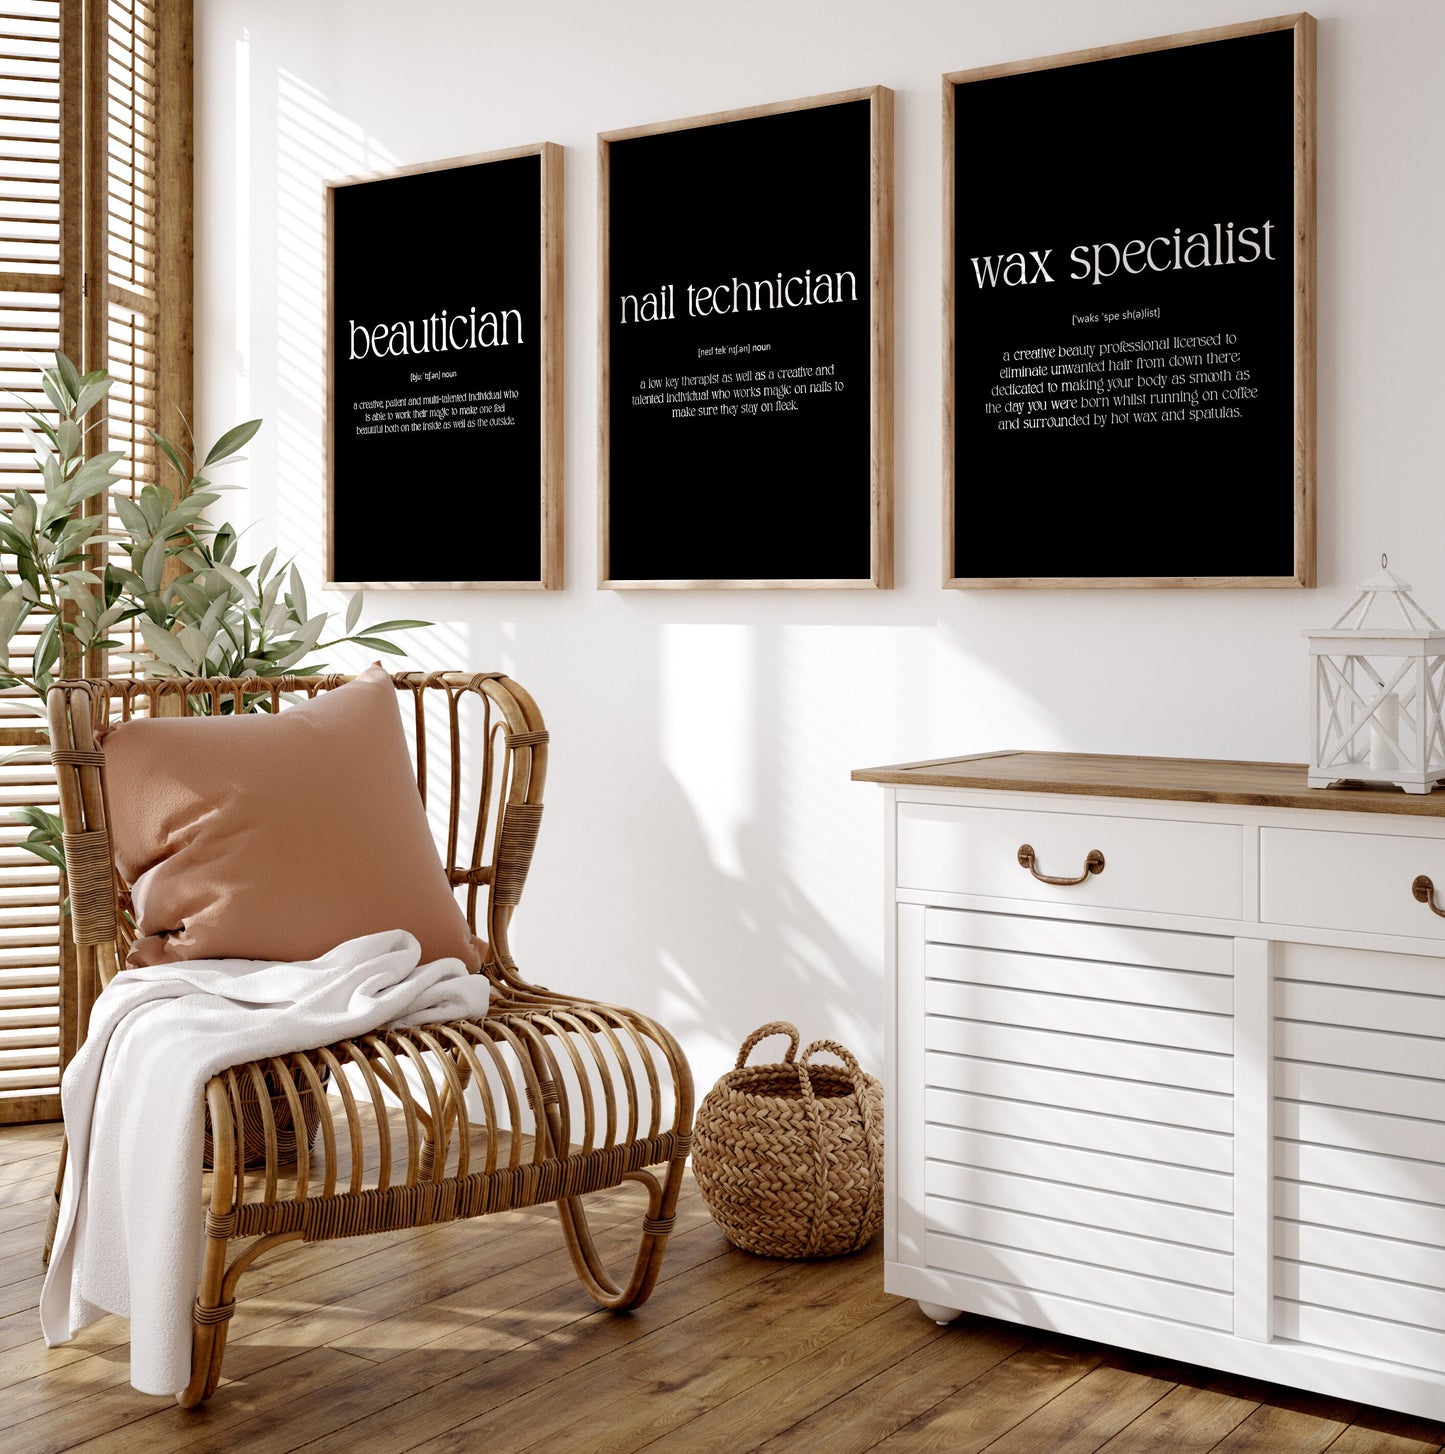 Beautician, Nail technician, Wax specialist Set Of 3 Definition Prints - Magic Posters